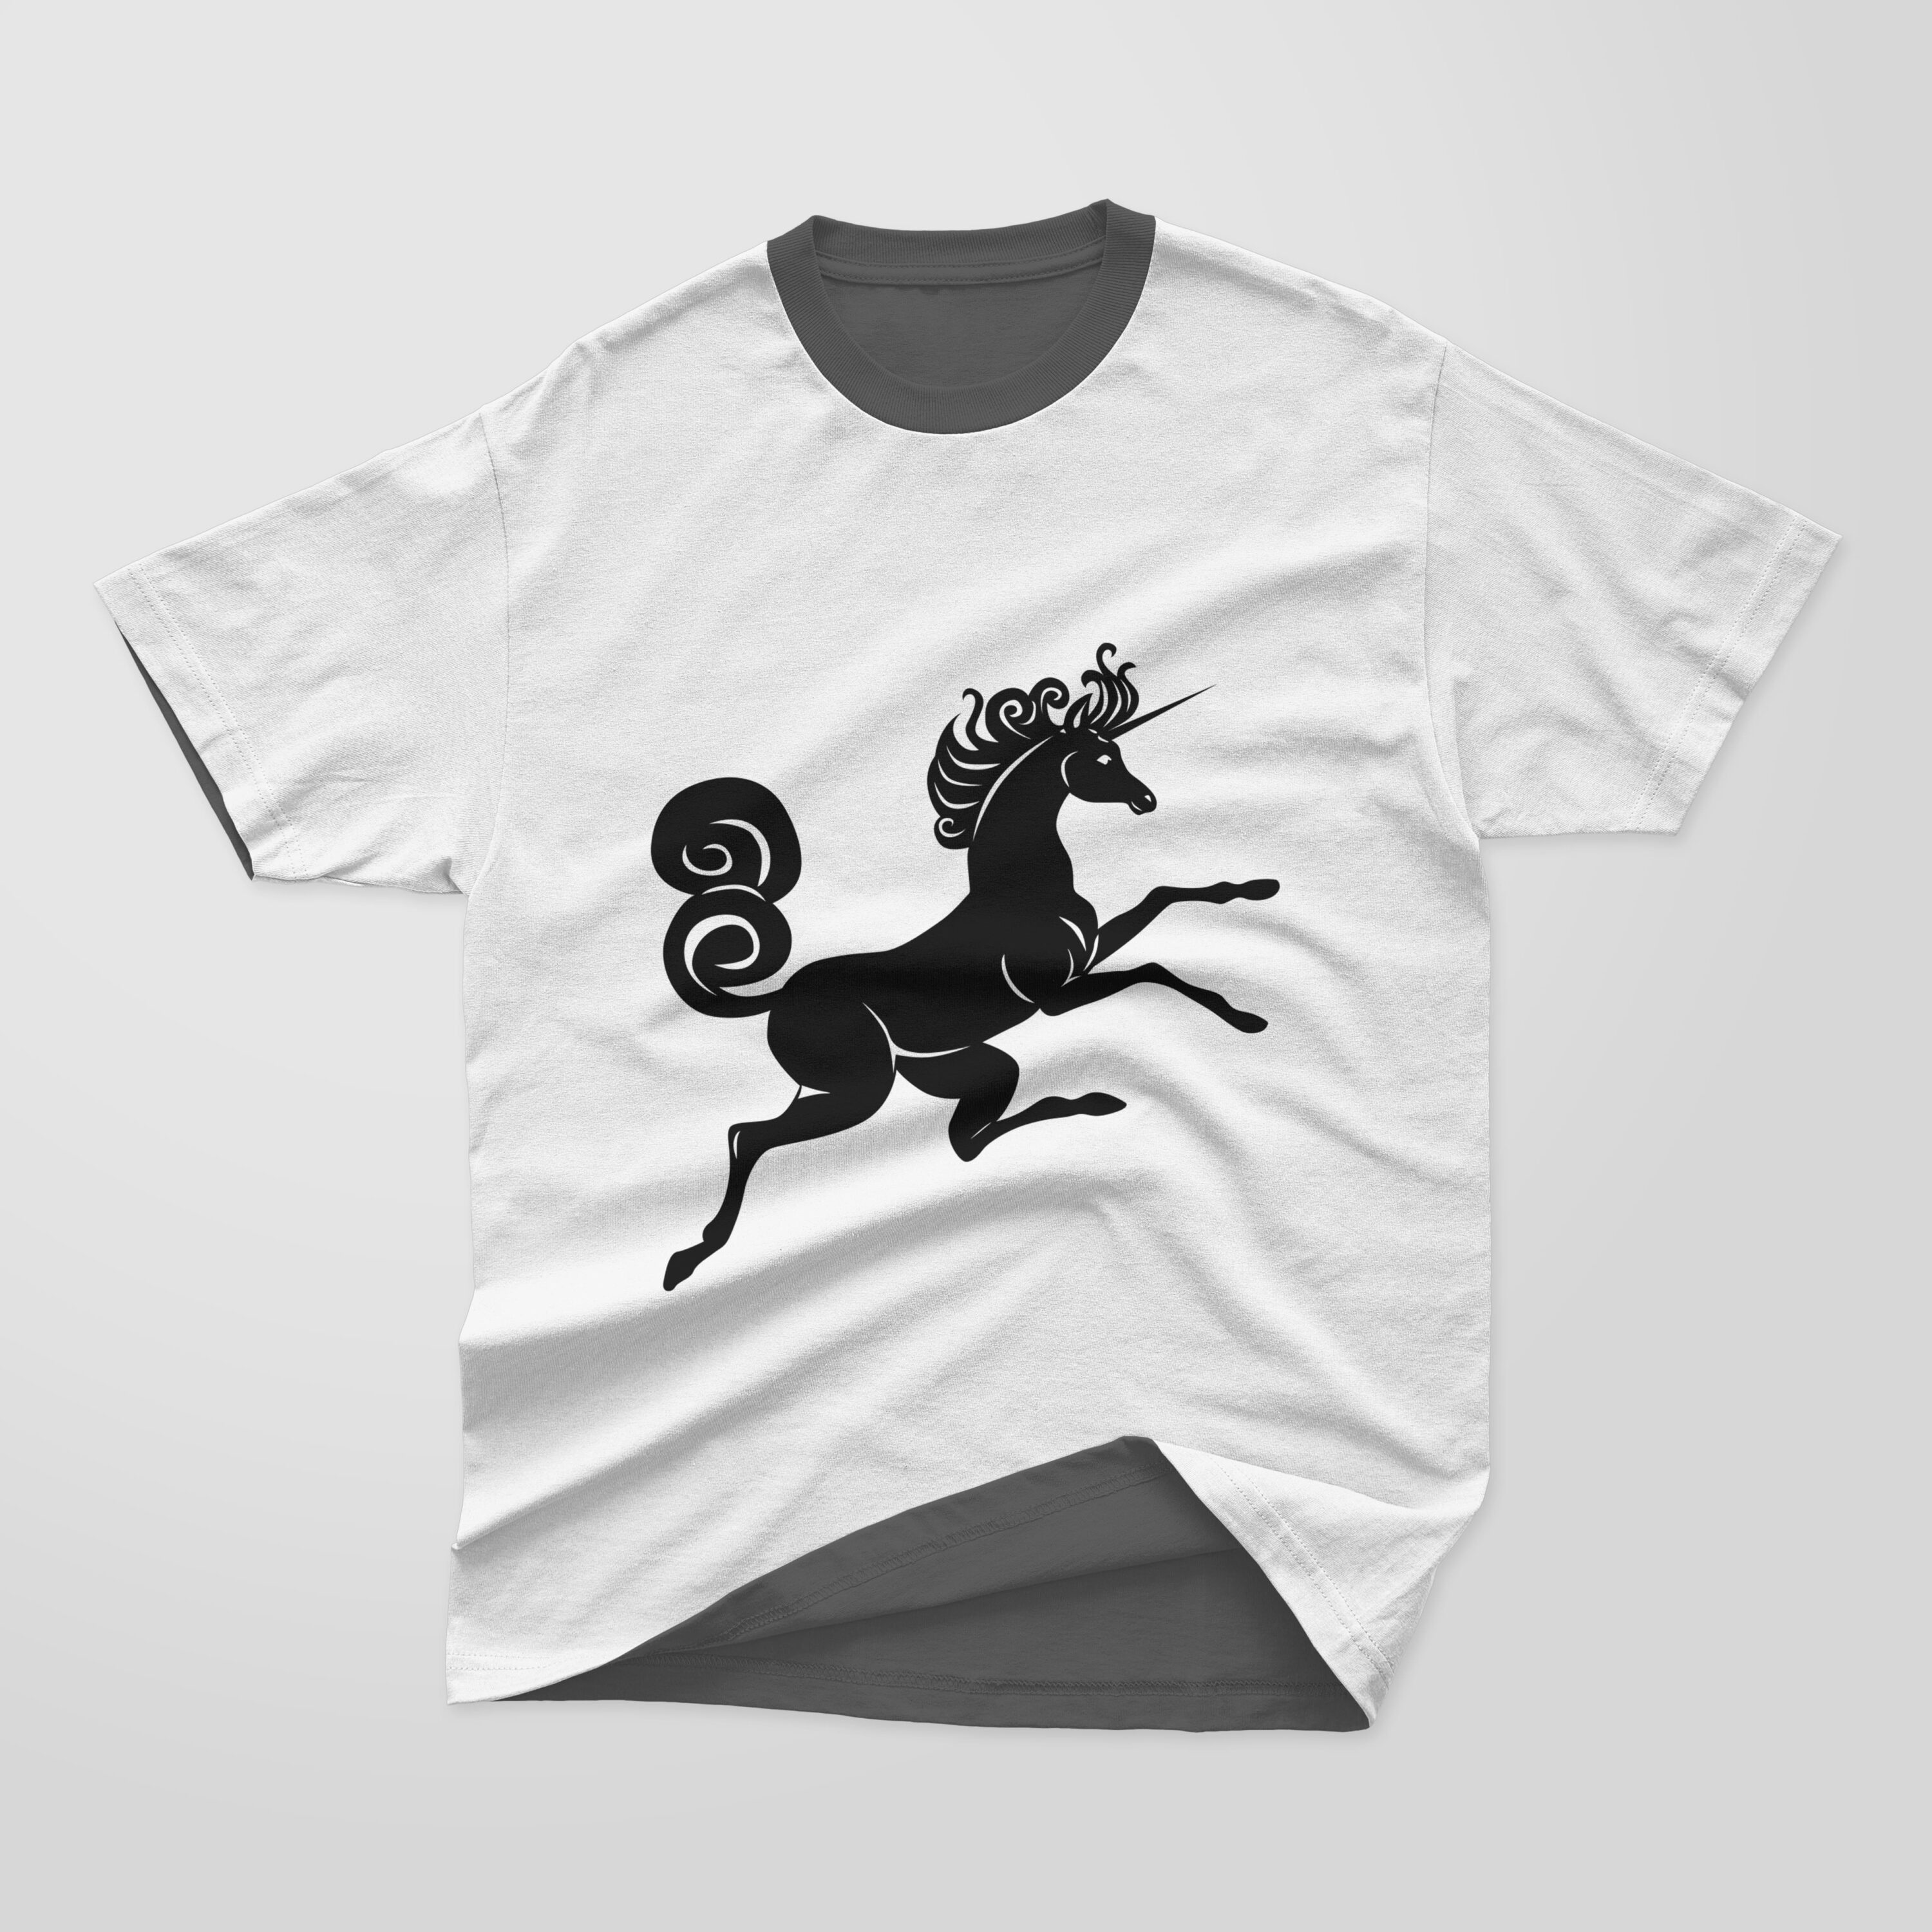 White and dark gray T-shirt with a dark gray collar and a black silhouette of a unicorn on a gray background.